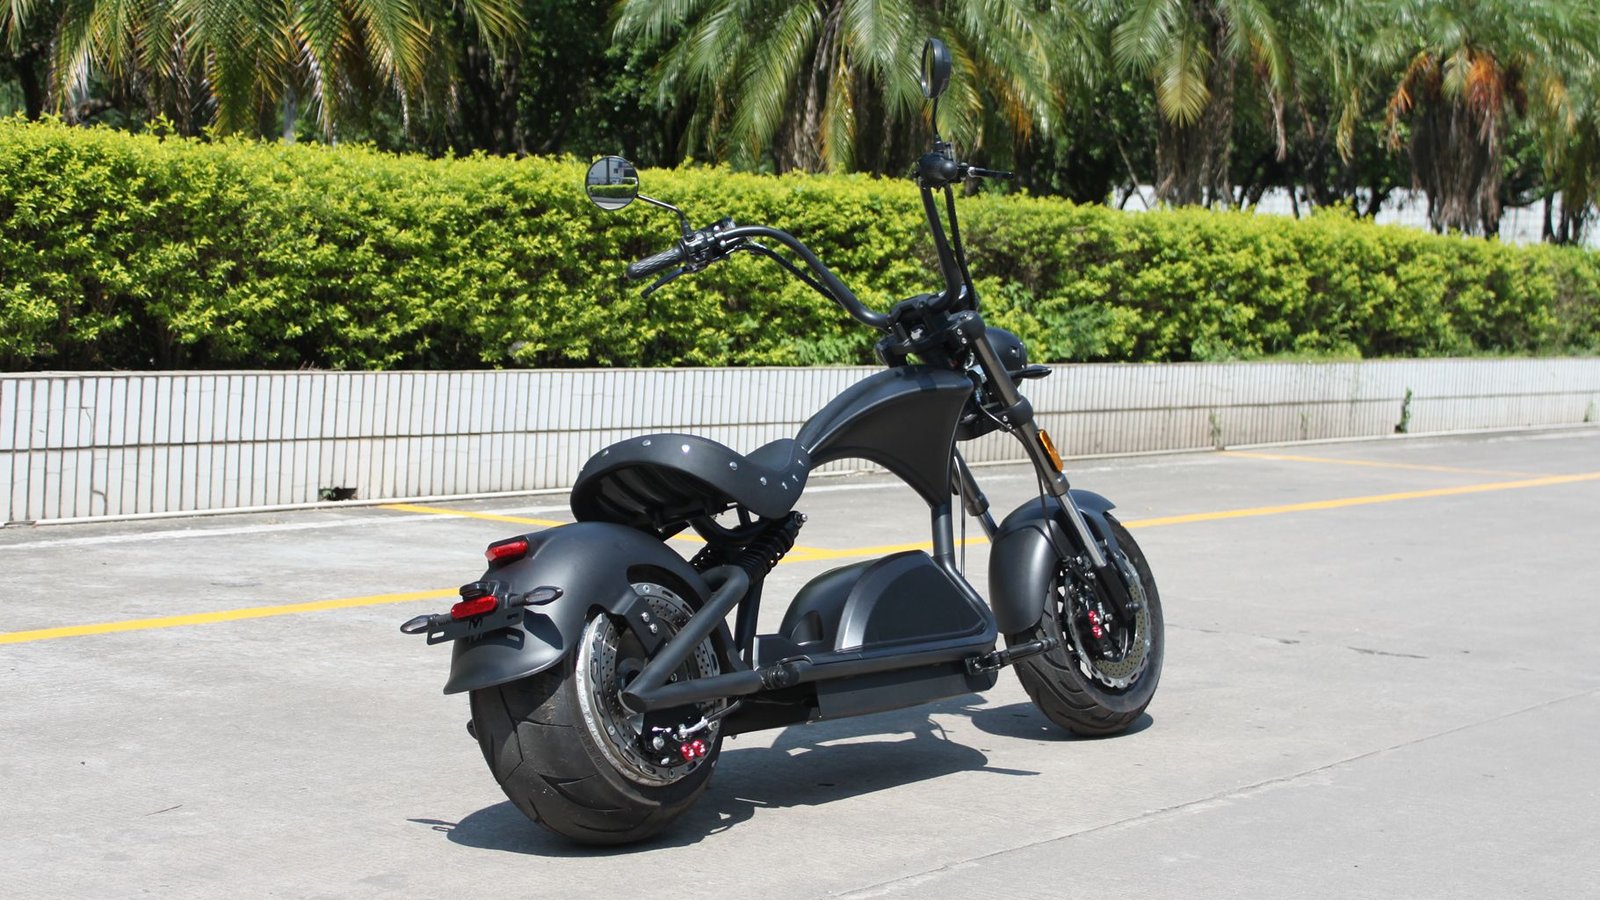 Rooder Mangosteen Sara M1ps 72v 4000w citycoco chopper electric motorcycle scooter (10)